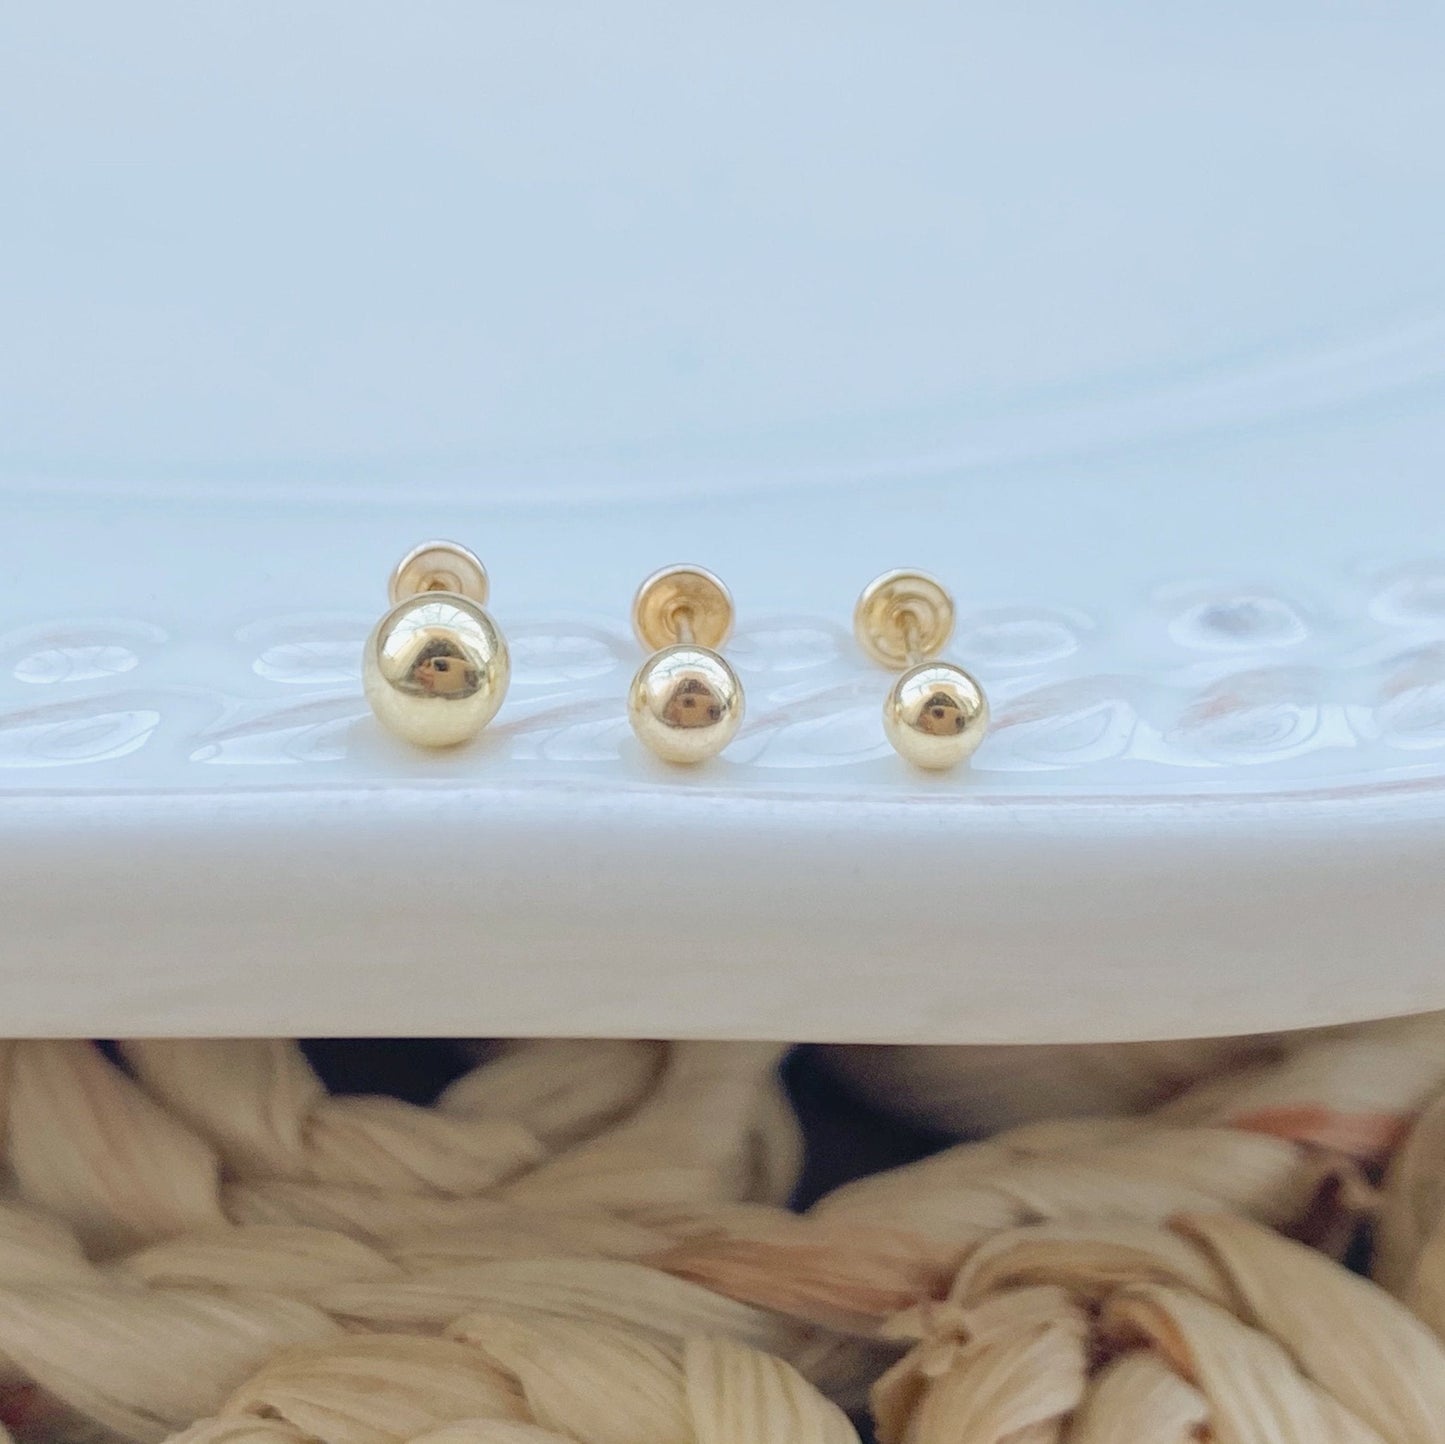 Load image into Gallery viewer, These little gold earrings are perfect to add a touch of sparkle to your everyday outfits. Available in sizes 2mm, 3mm or 4mm, they are the perfect companion for any outfit. The design is very simple: just a gold ball
